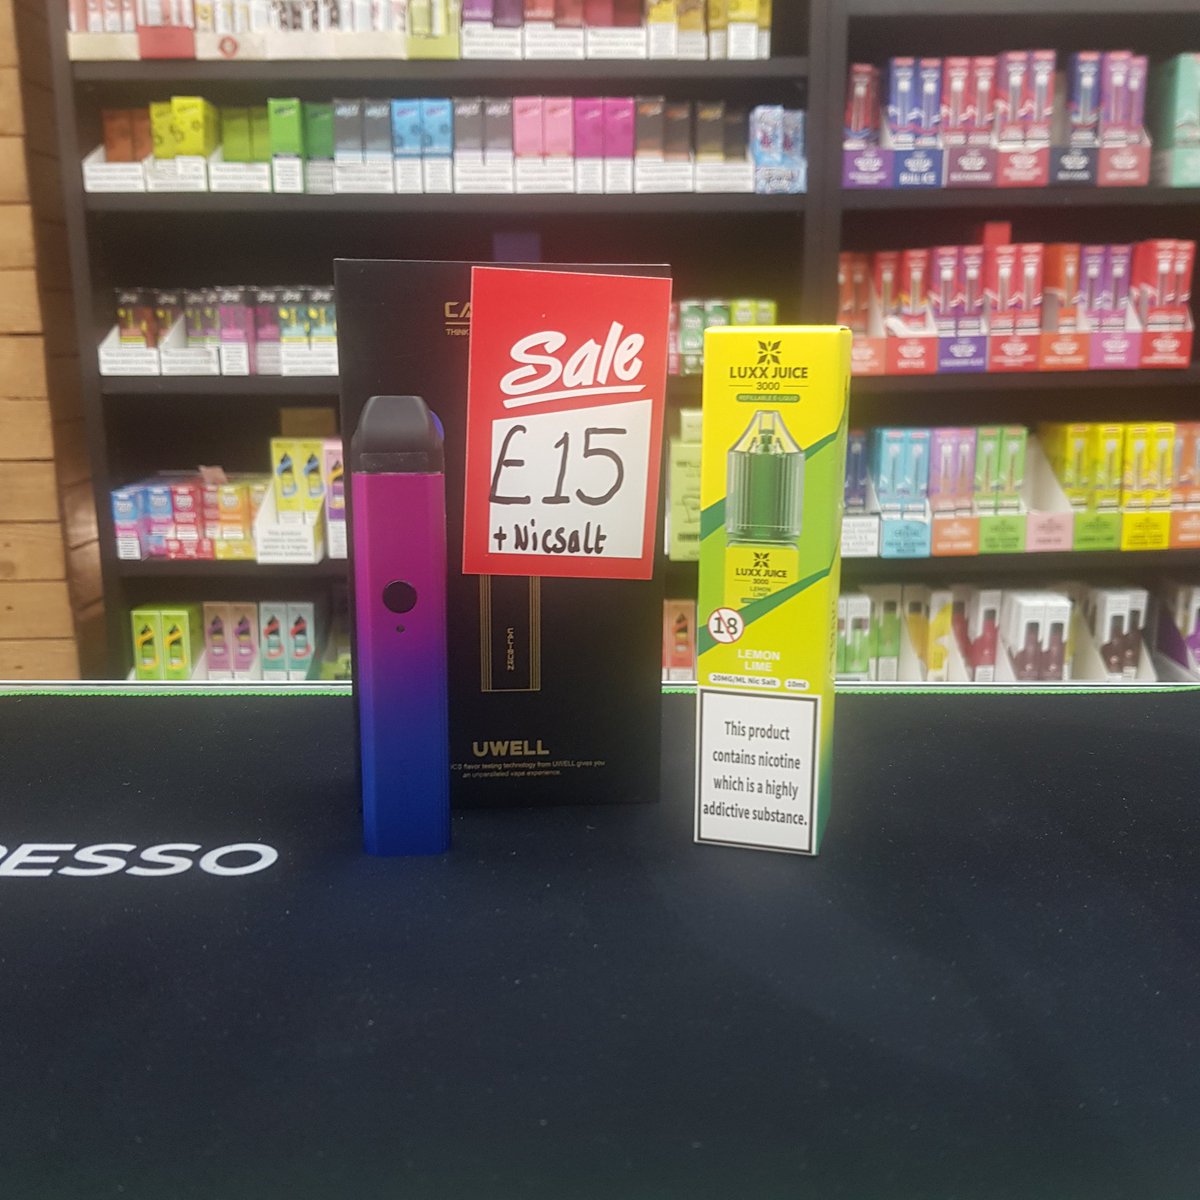 Great little starter device 
Uwell caliburn portable system 
With 1x salt 
Just £15